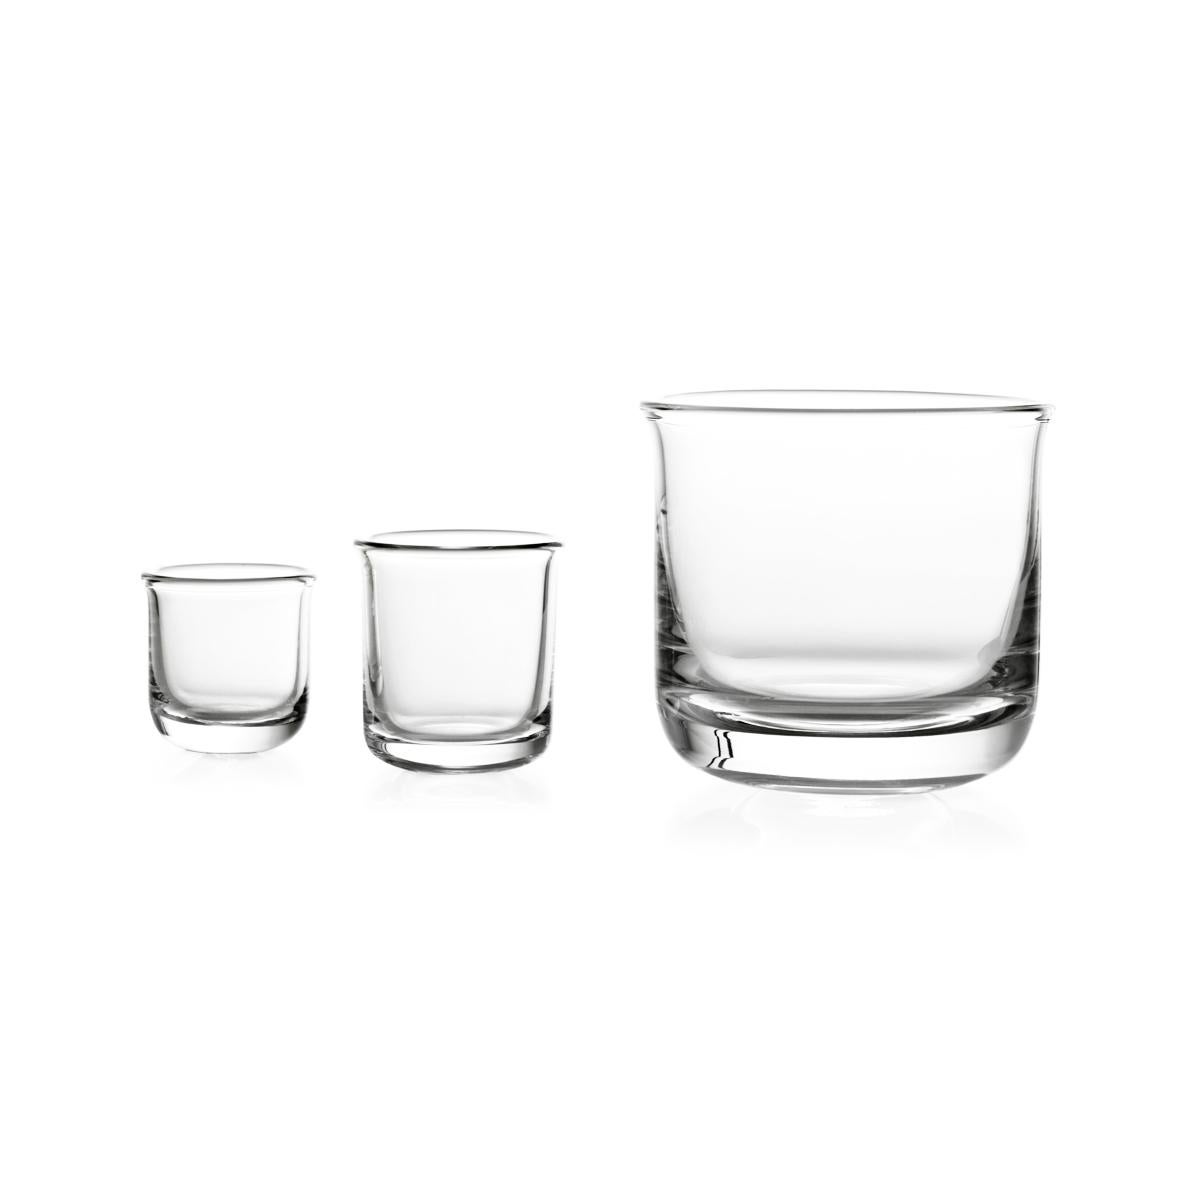 Liqueur glass in blown in a mold glass. Aldo collection is a family of glassware for tasting liqueurs. The handy and slightly flared shape allows to perceive the aromas in the best way, so the moment of sipping a quality distillate becomes even more